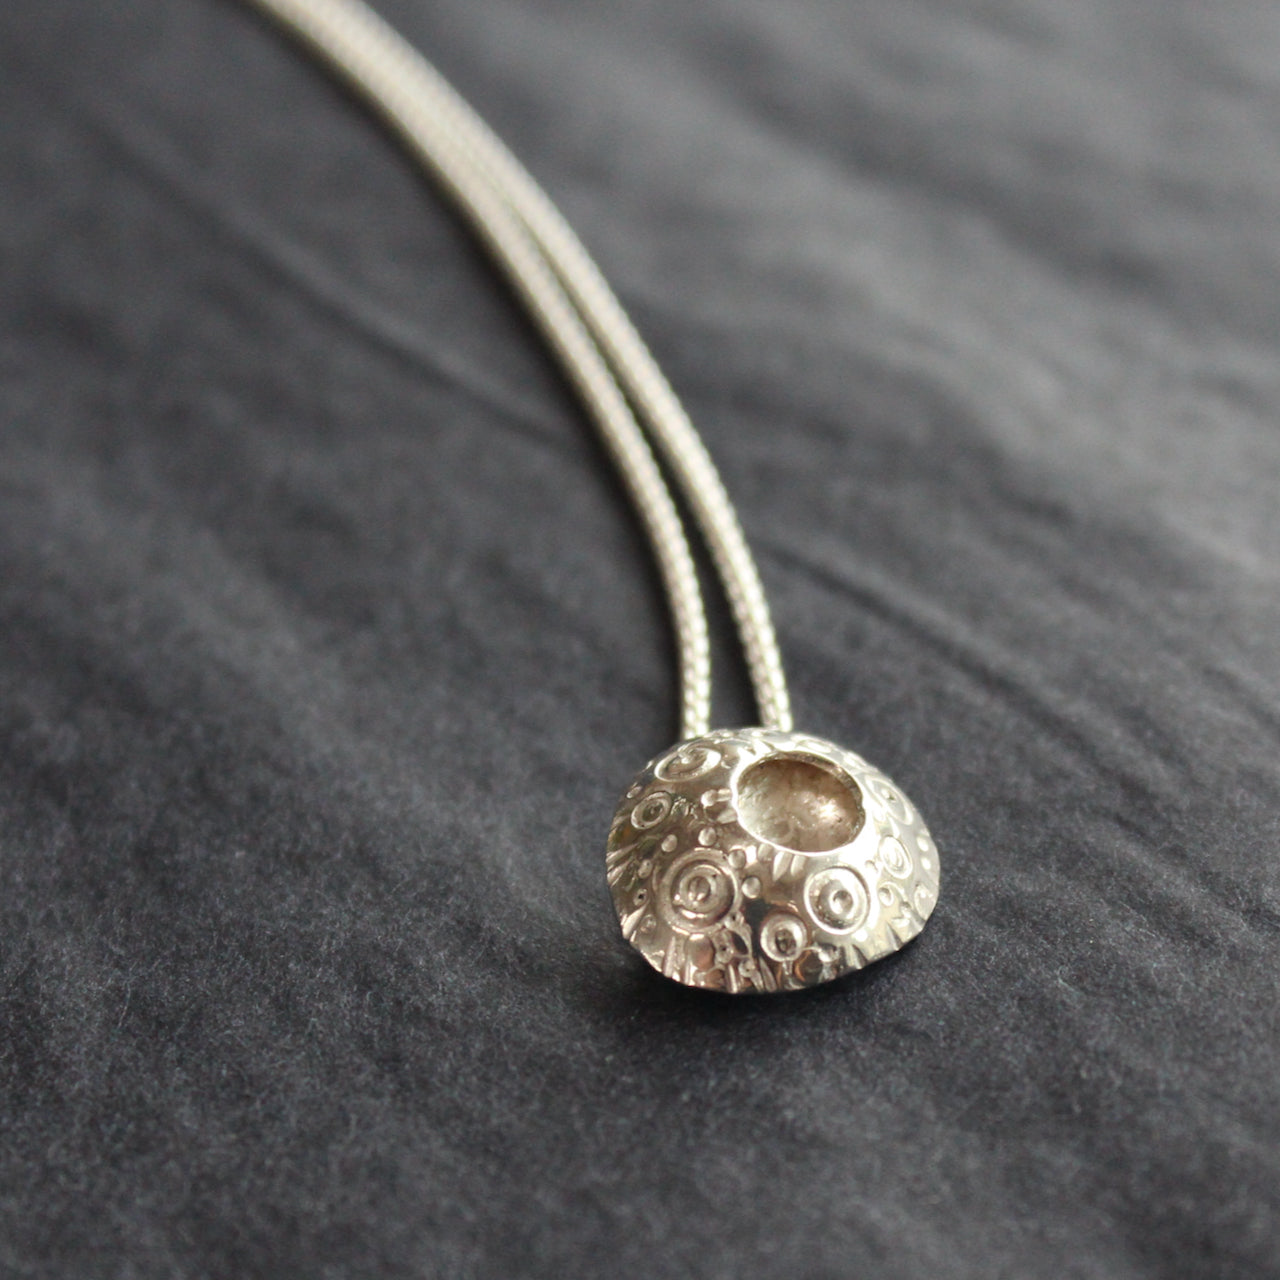 circular silver pendant with an indented middle and a textured surface design on a silver chain by Devon jeweller Ann Bruford 